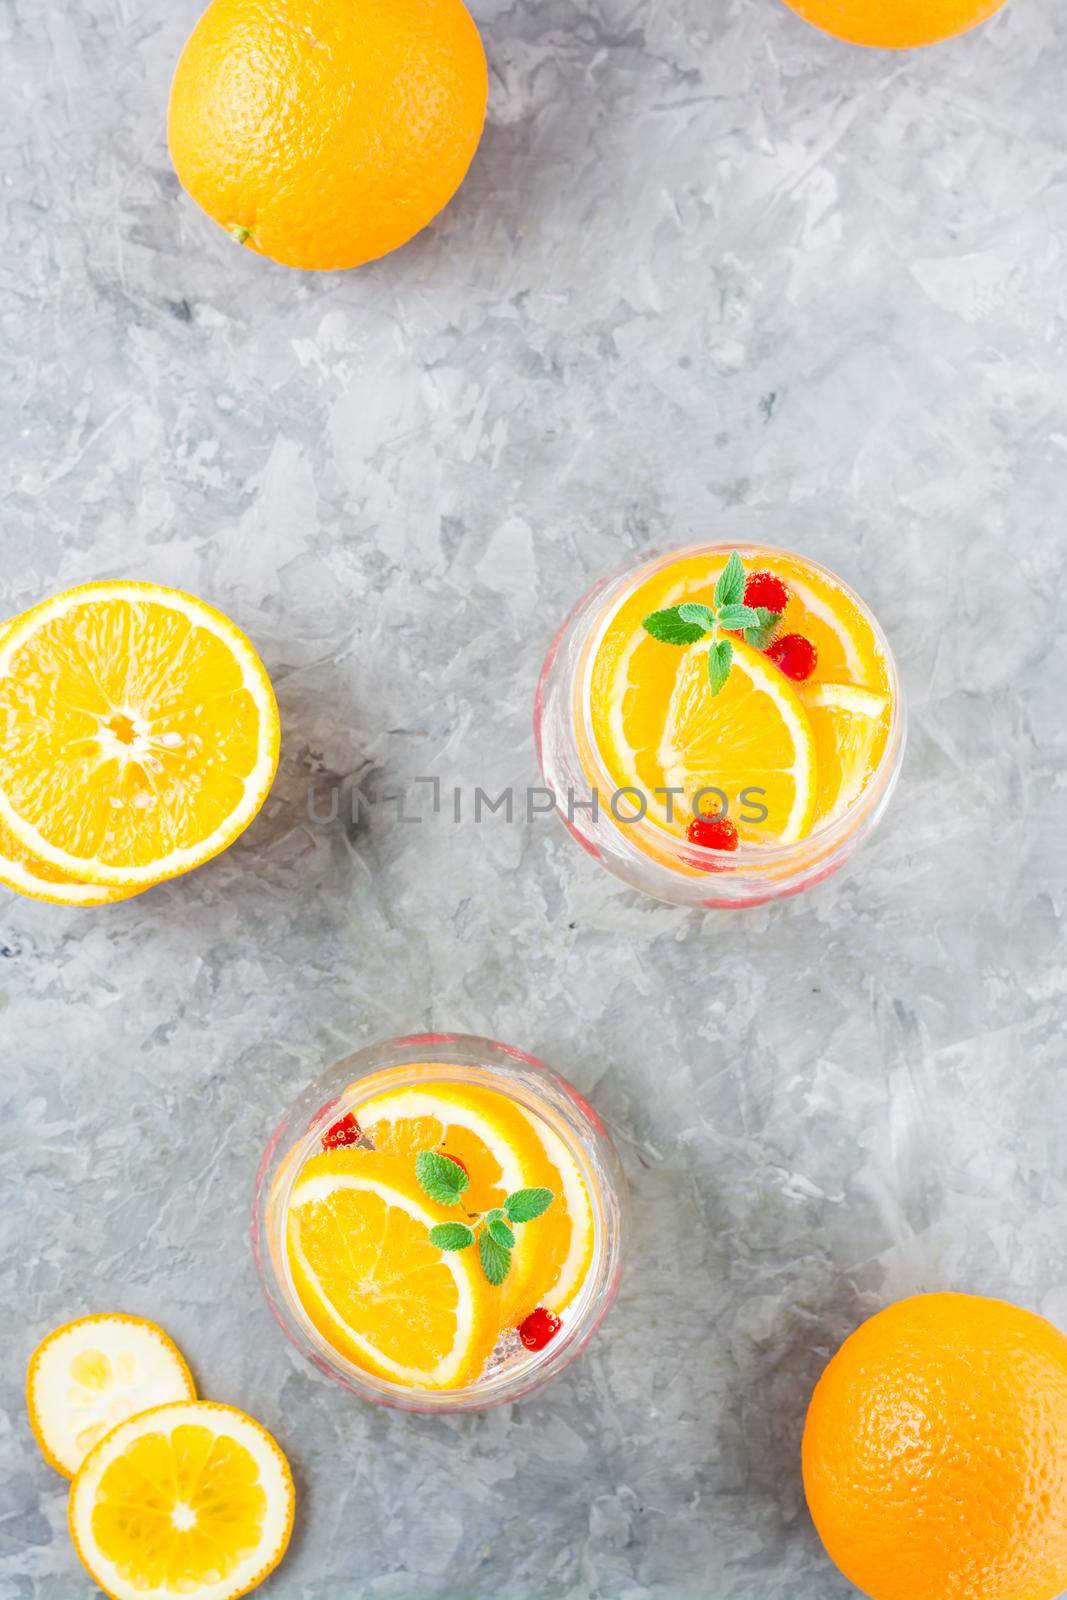 Hard seltzer cocktail with orange, cranberry and mint in glasses and cut oranges on the table. Alcoholic beverage. Vertical and top view